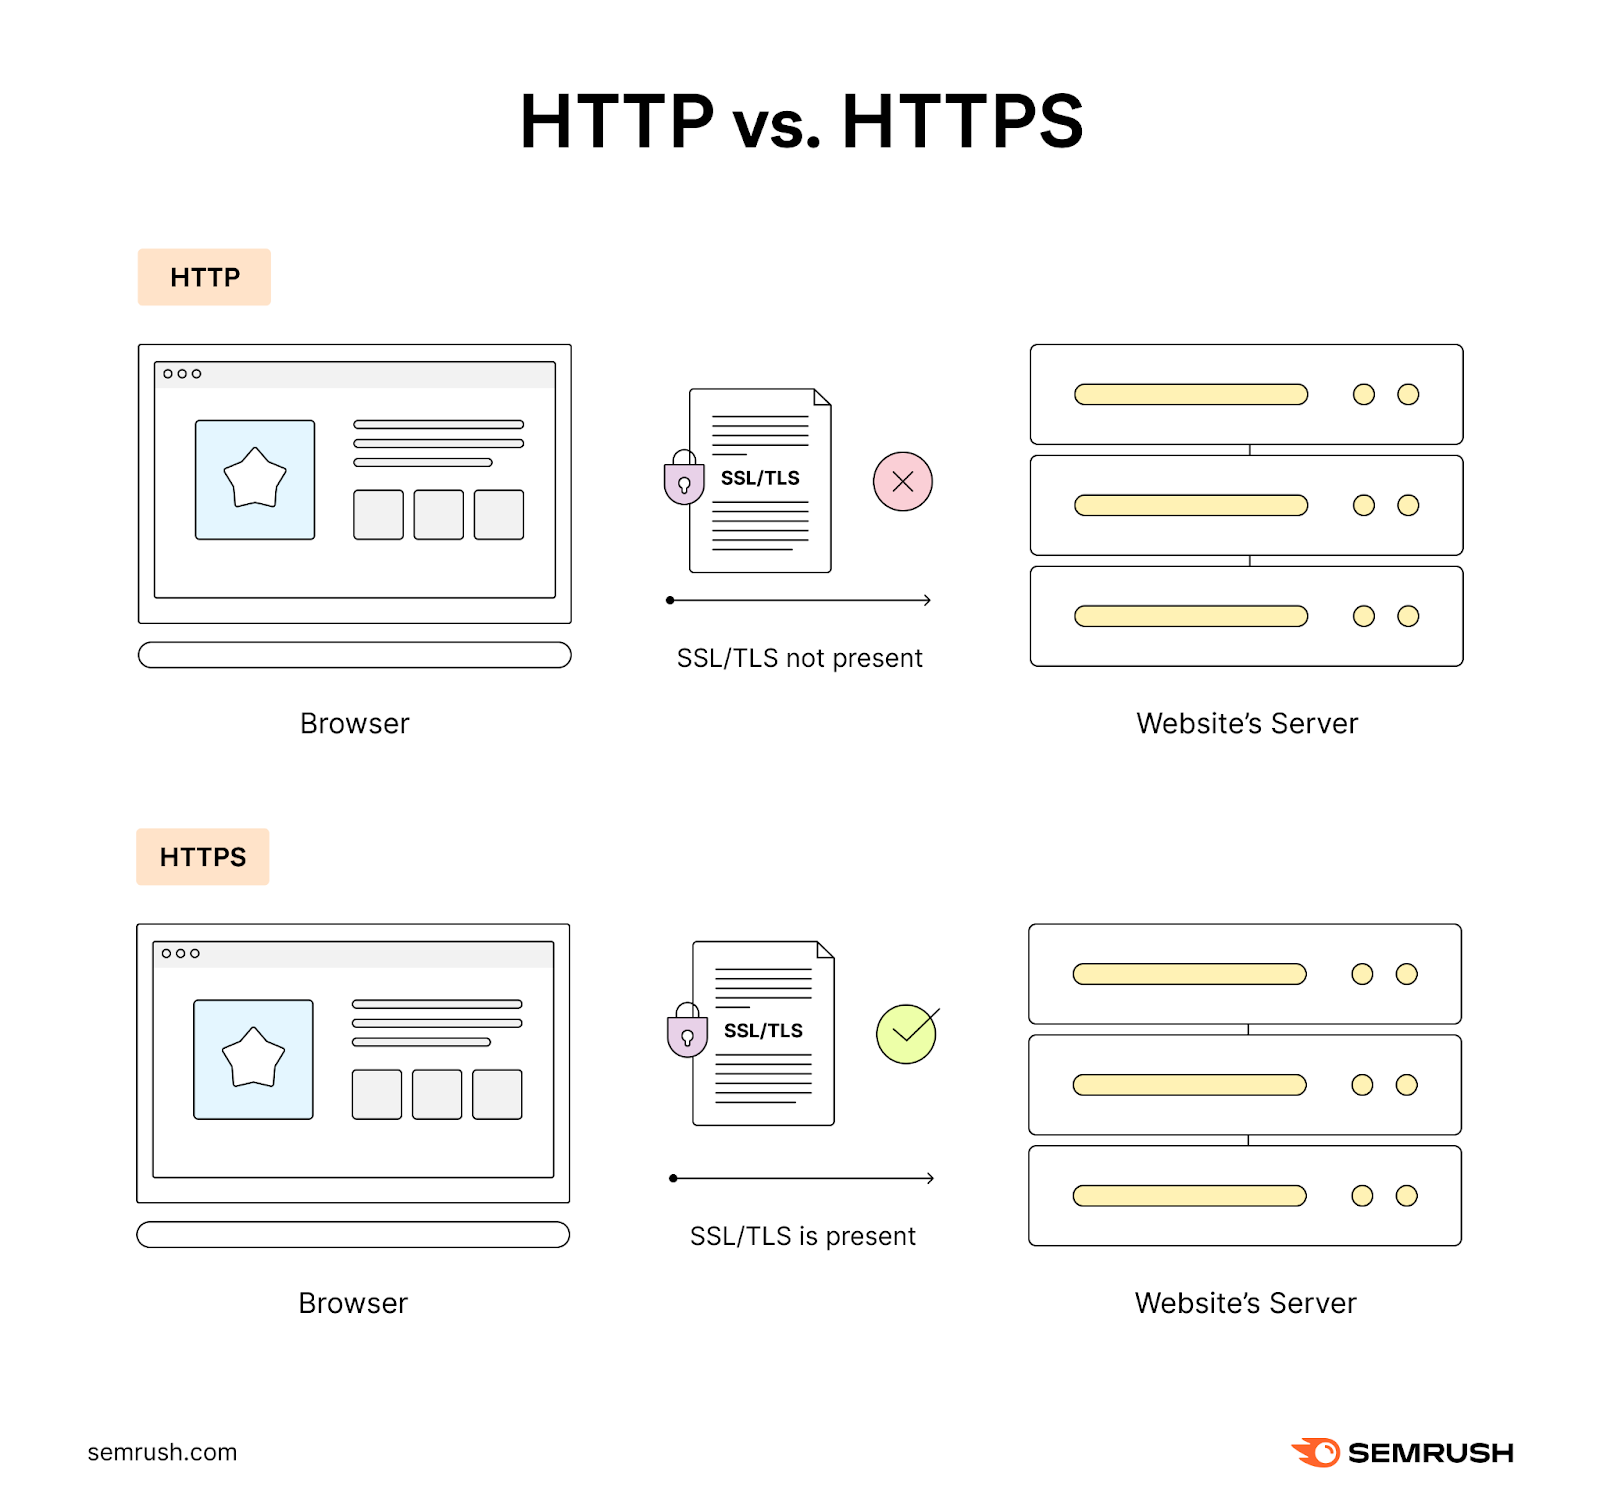 In HTTPS communication SSL/TLS certificate proves a website’s identity and authenticity